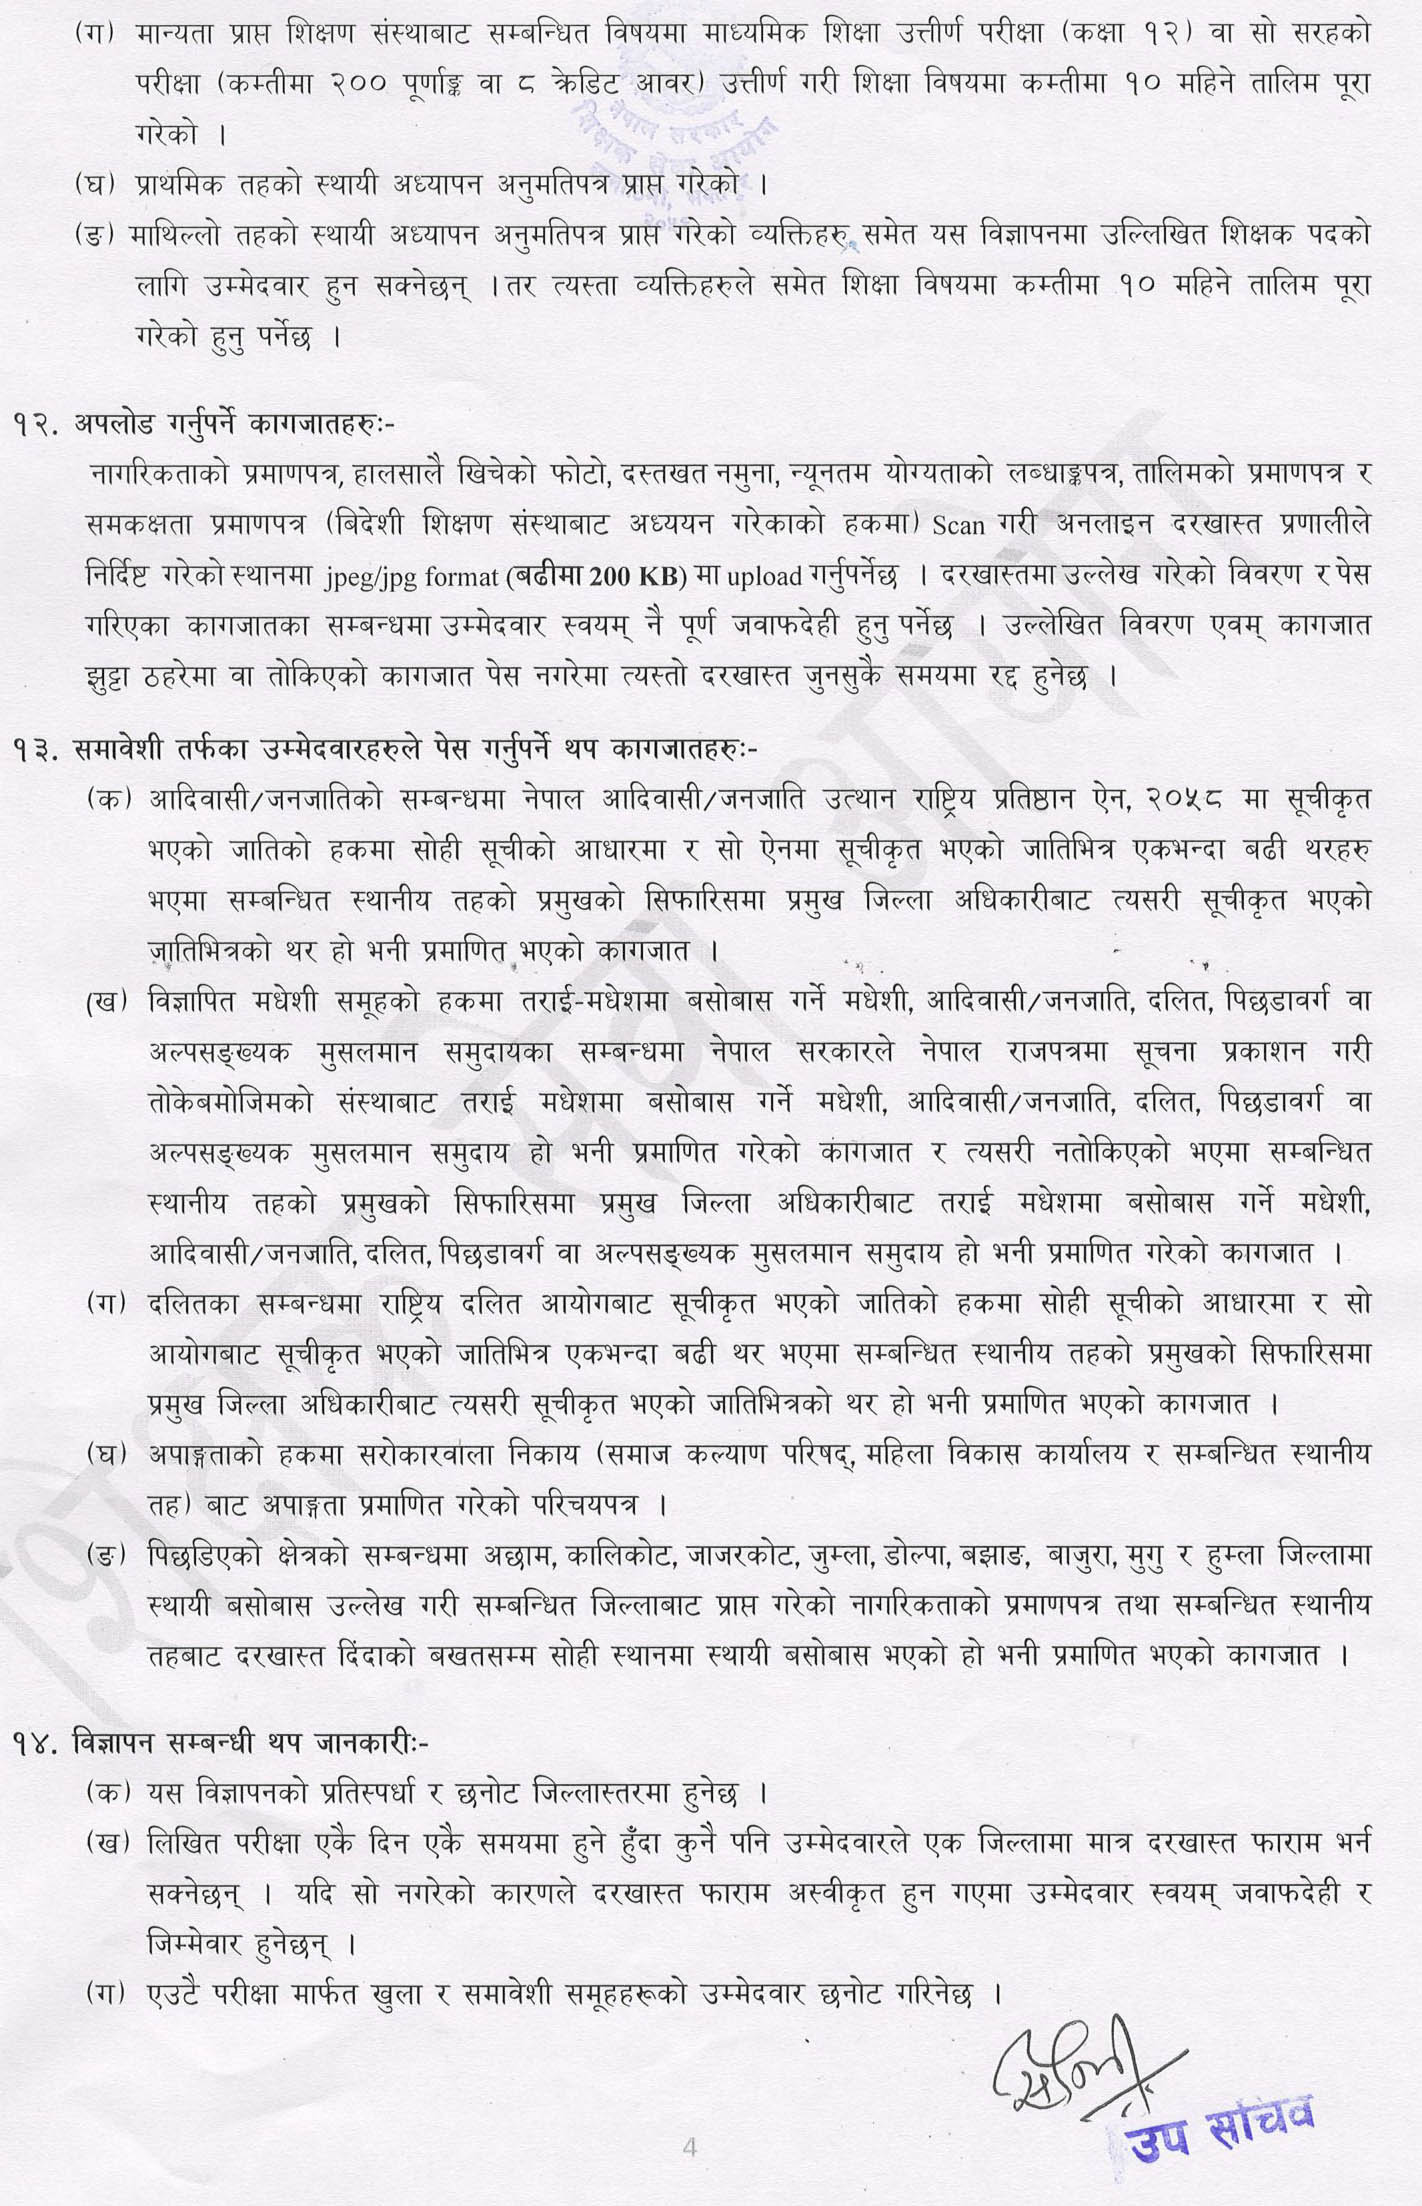 Government of Nepal, Shikshak Sewa Aayog advertisement of open competitive examination for Primary level, third category, teacher post – 2079.